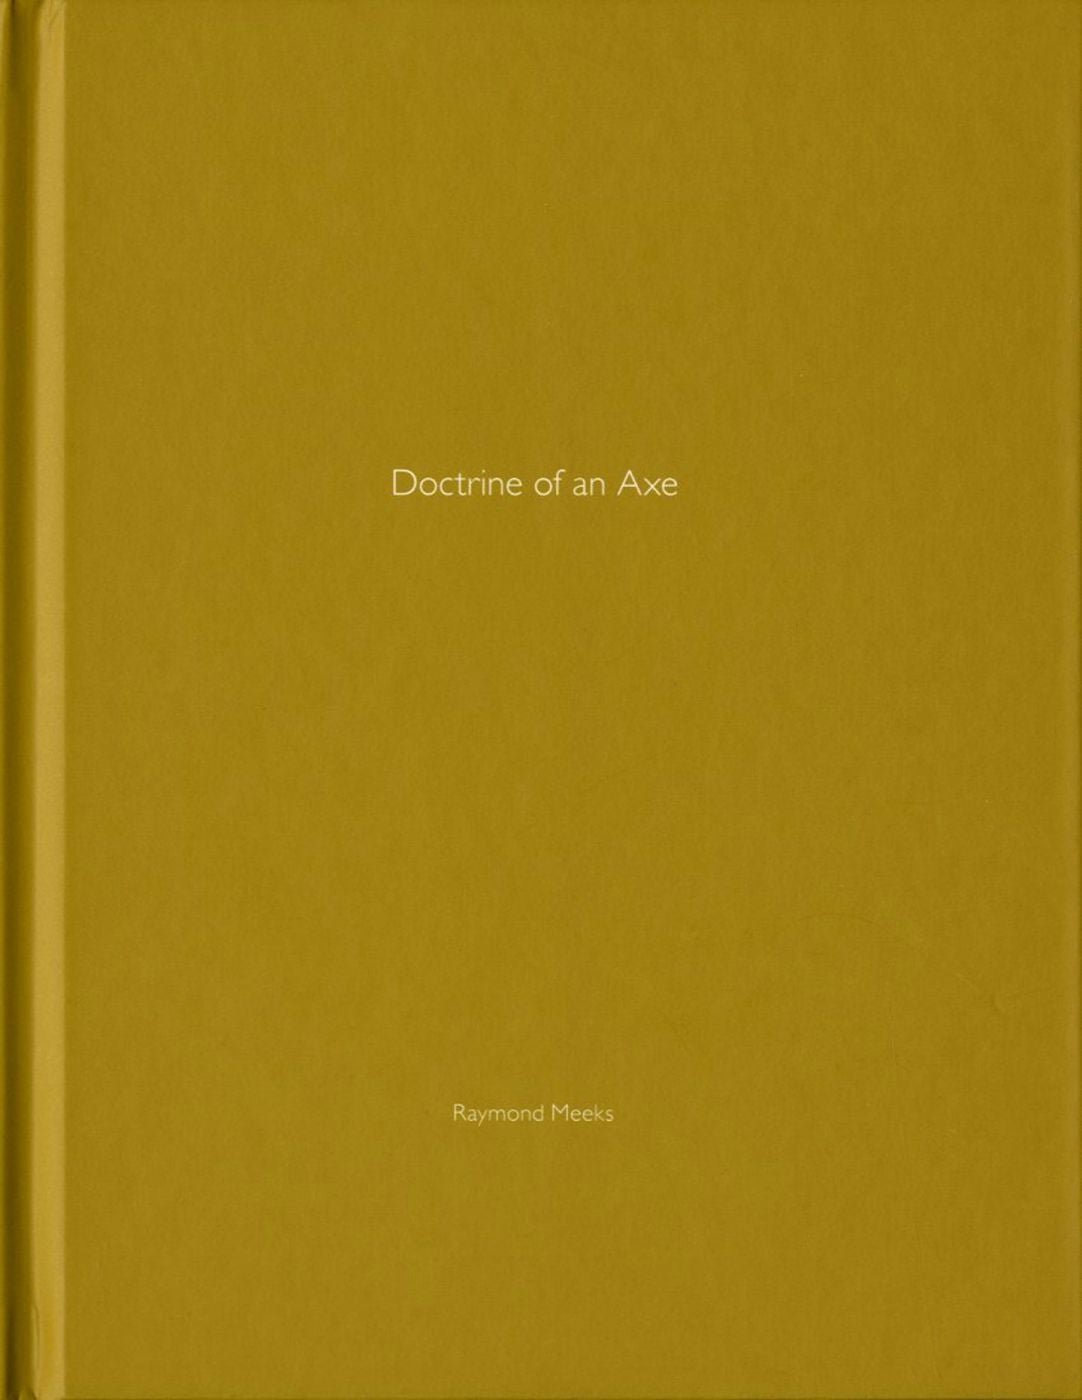 Raymond Meeks: Doctrine of an Axe (One Picture Book #54), Limited Edition (with Print)